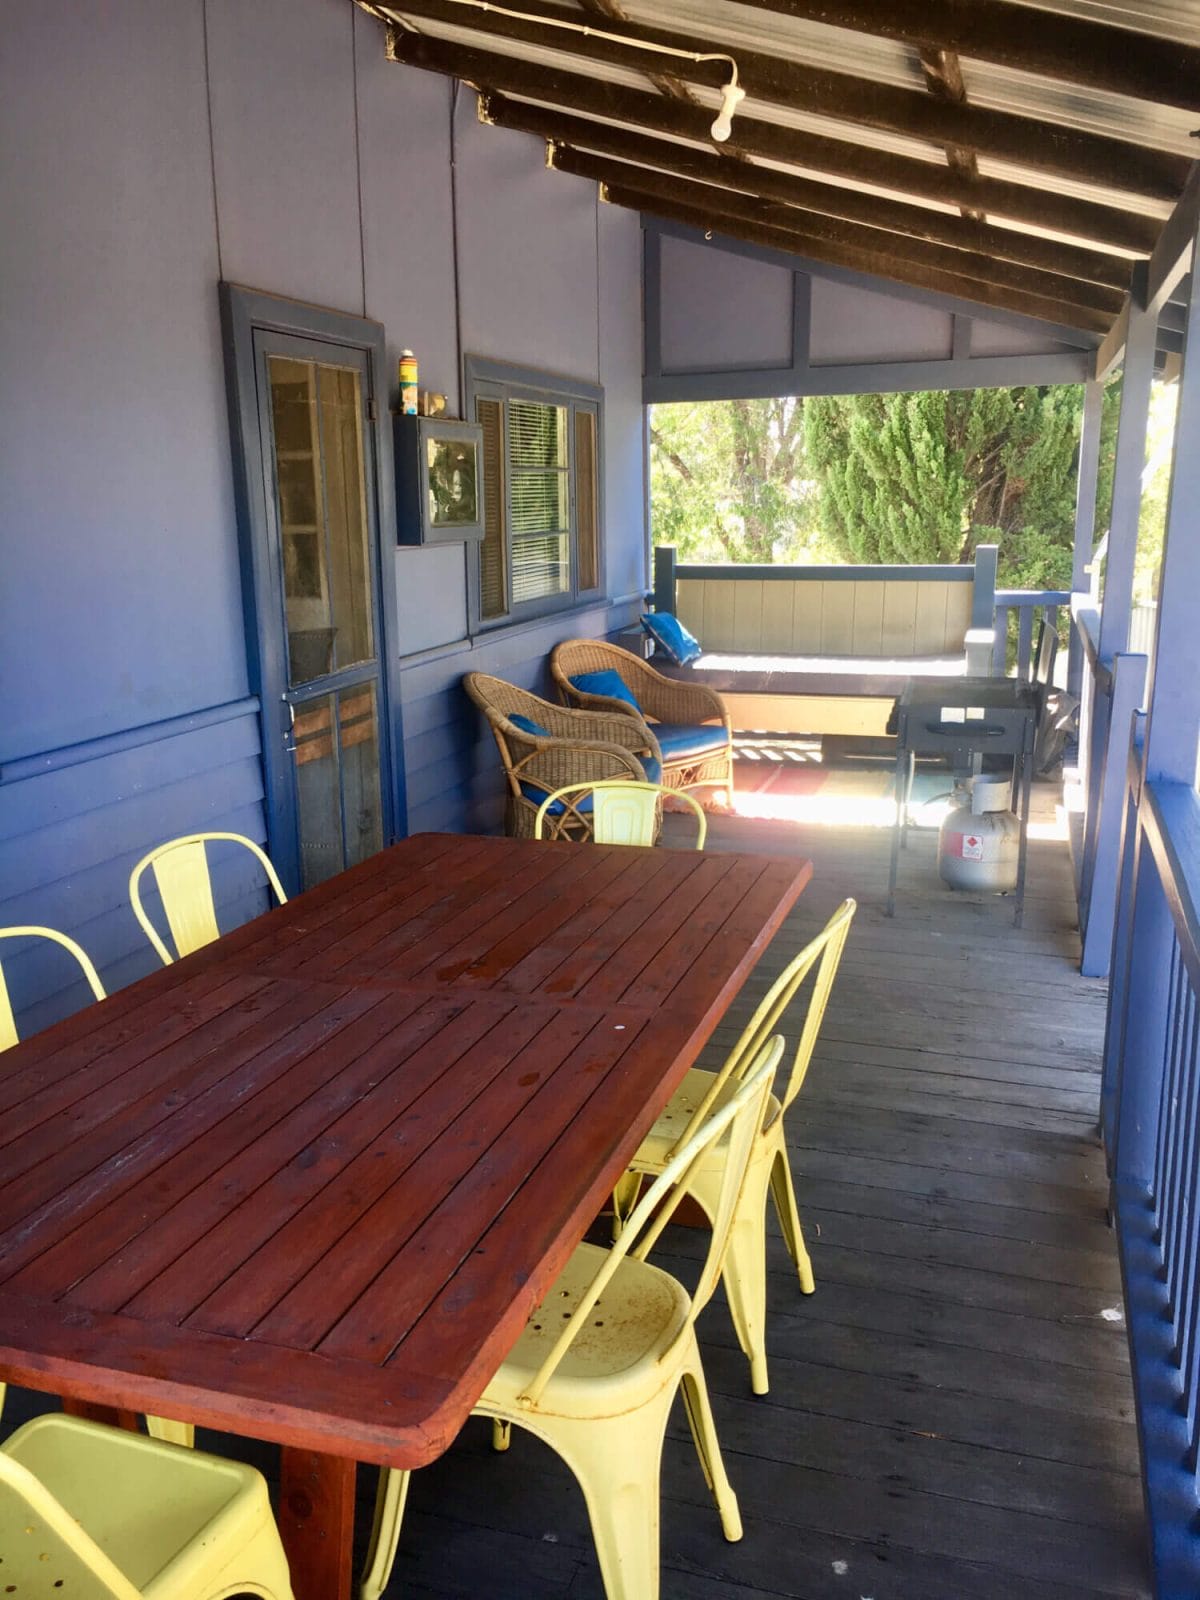 Weekender - Accommodation in Bremer Bay - 21 Barbara Street. Outdoor verandah features dining area, outdoor lounge area and BBQ